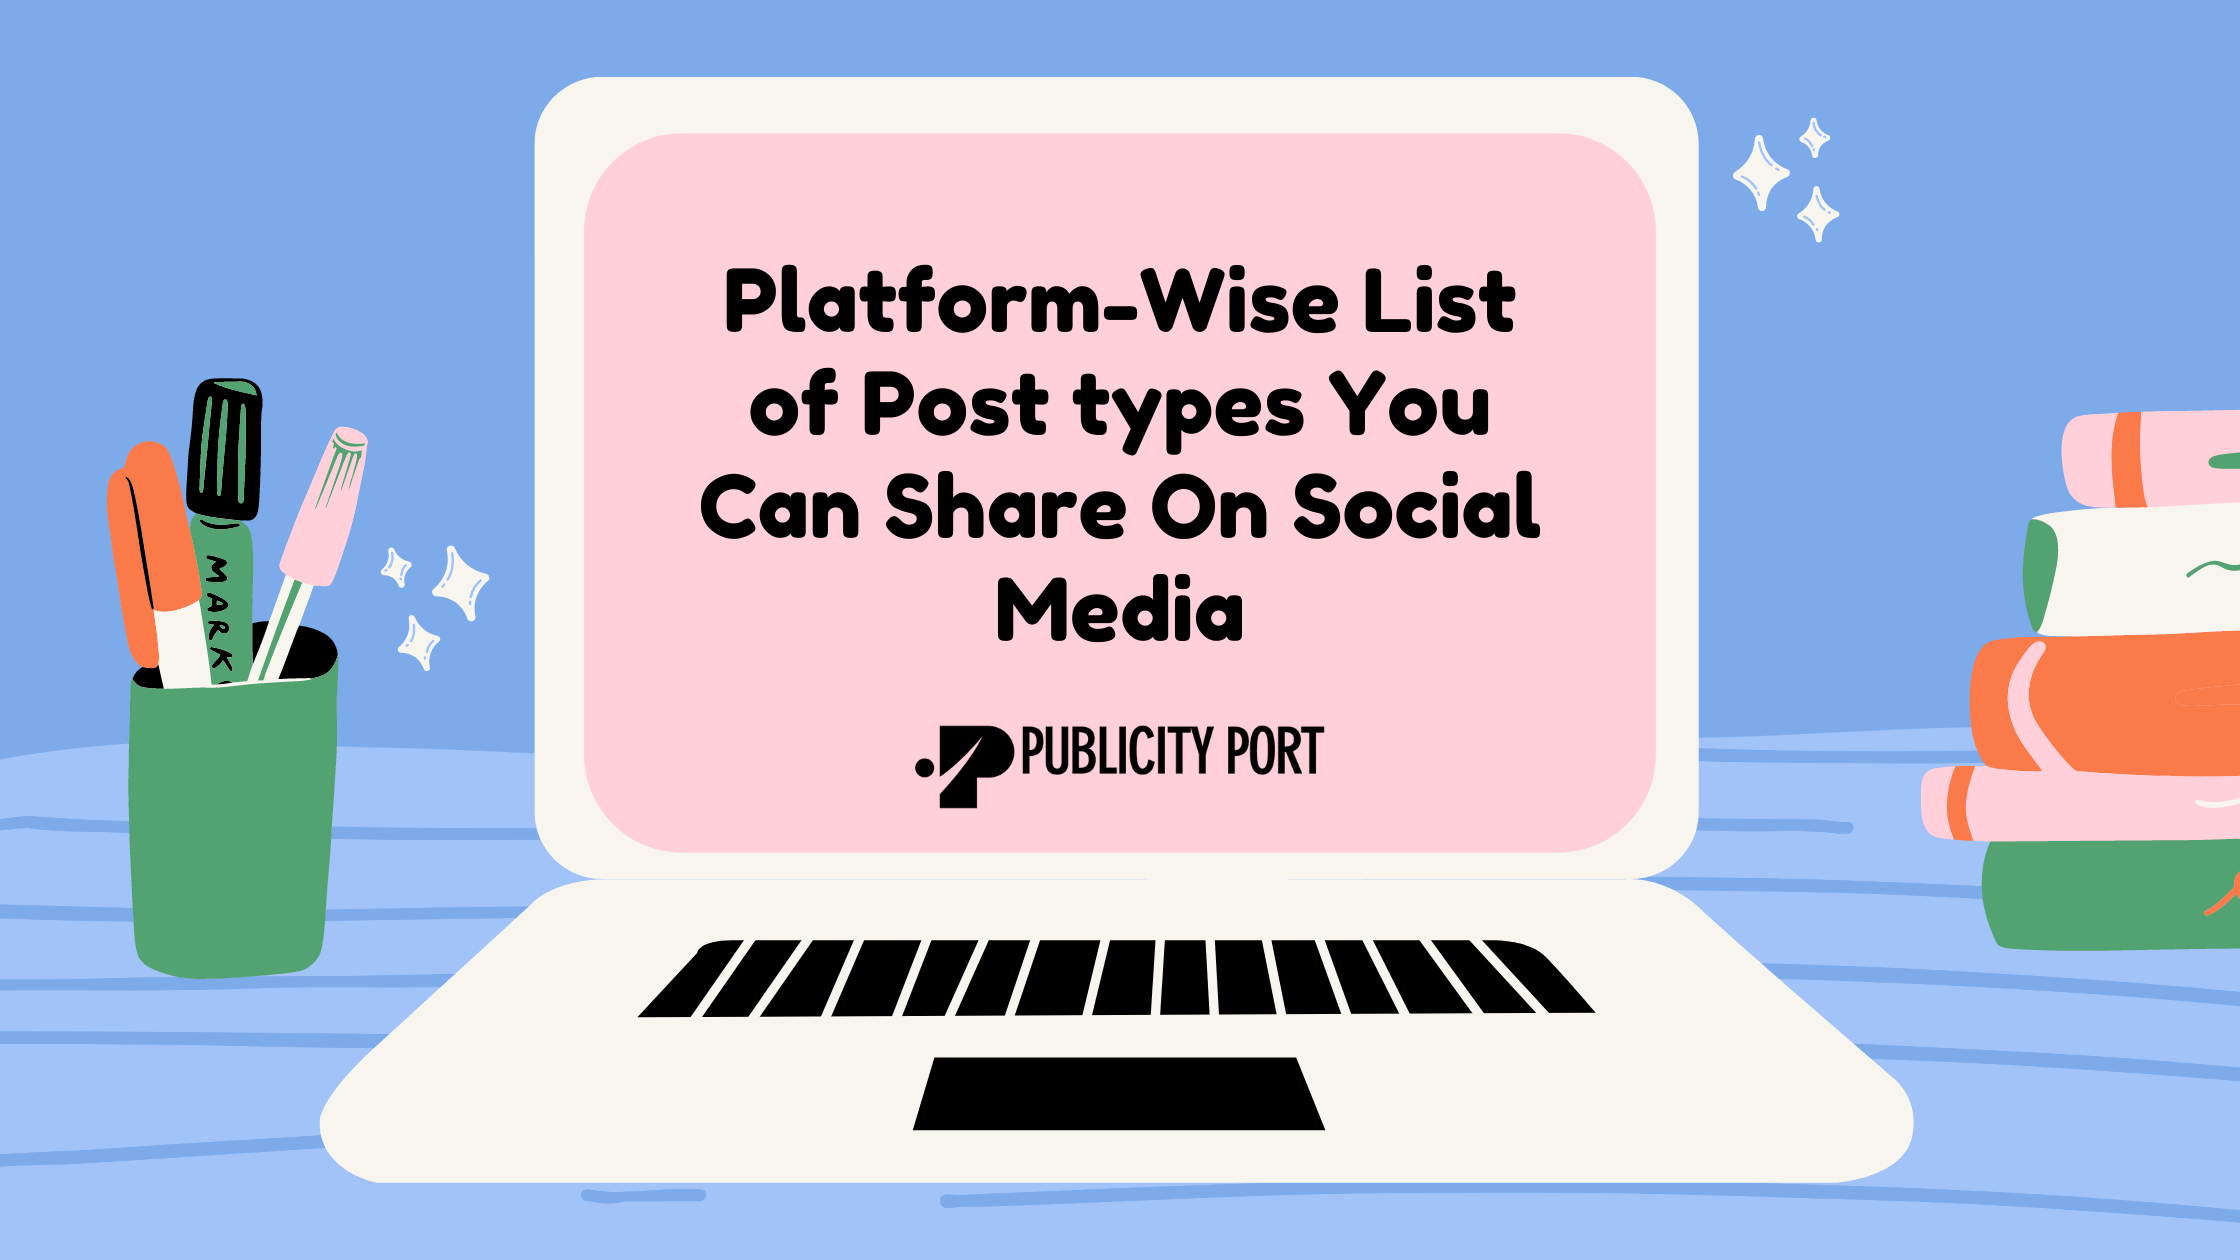 Platform-Wise List of Post types You Can Share On Social Media